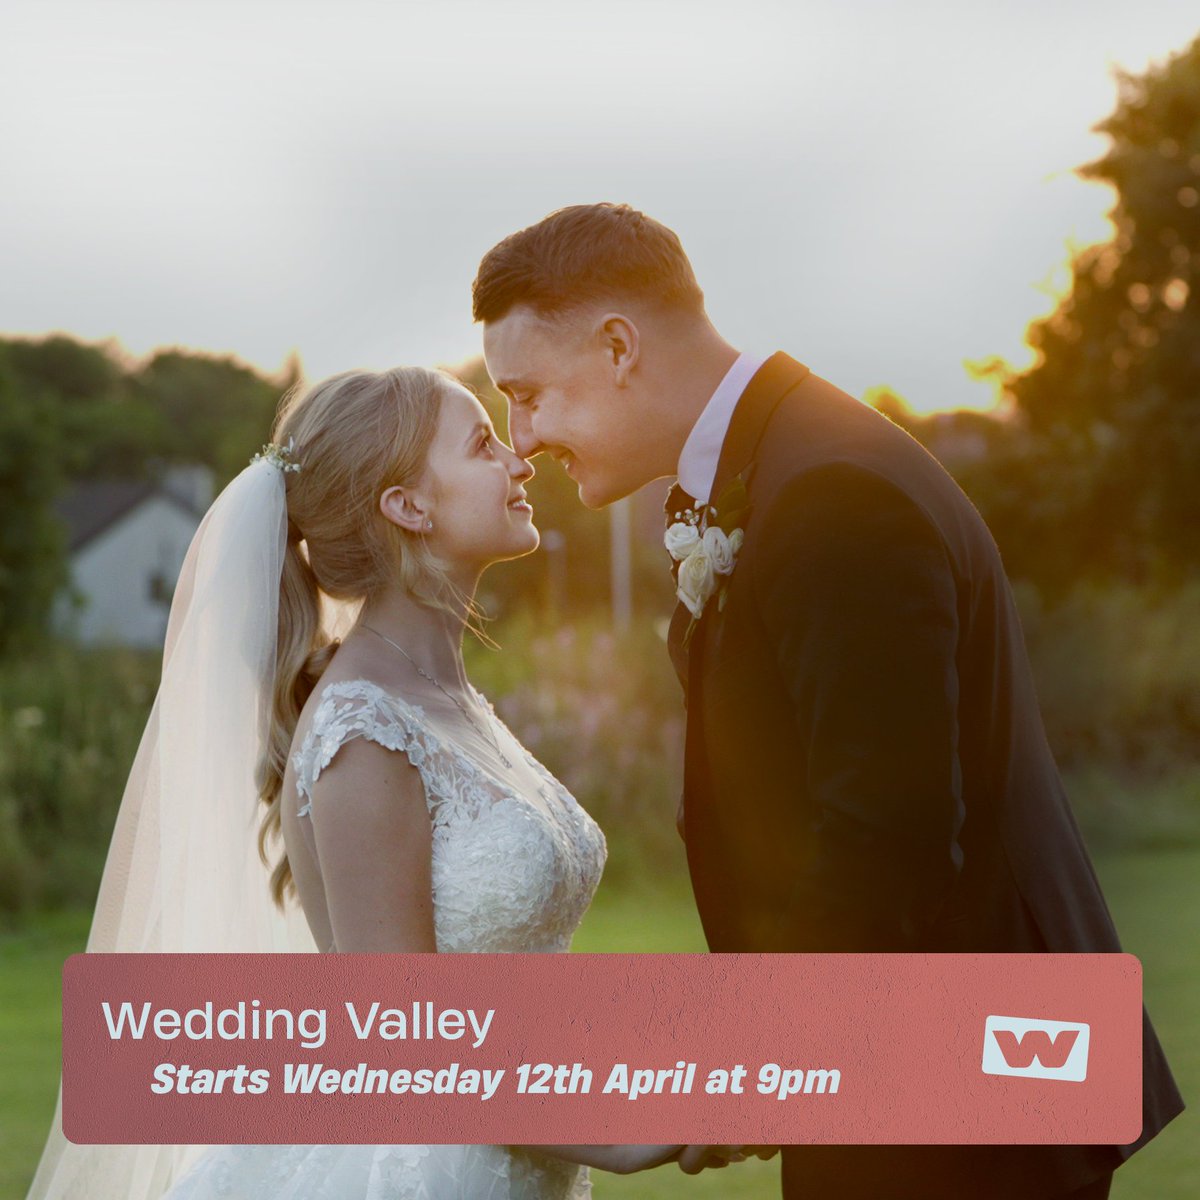 Calling all wedding lovers! 📢 Tune in tomorrow evening to watch the first episode of Wedding Valley! With love, laughter, happy-tears - and the odd alpaca - it's not one to miss. Every Wednesday at 9pm and available on UKTV Play. #WeddingValley